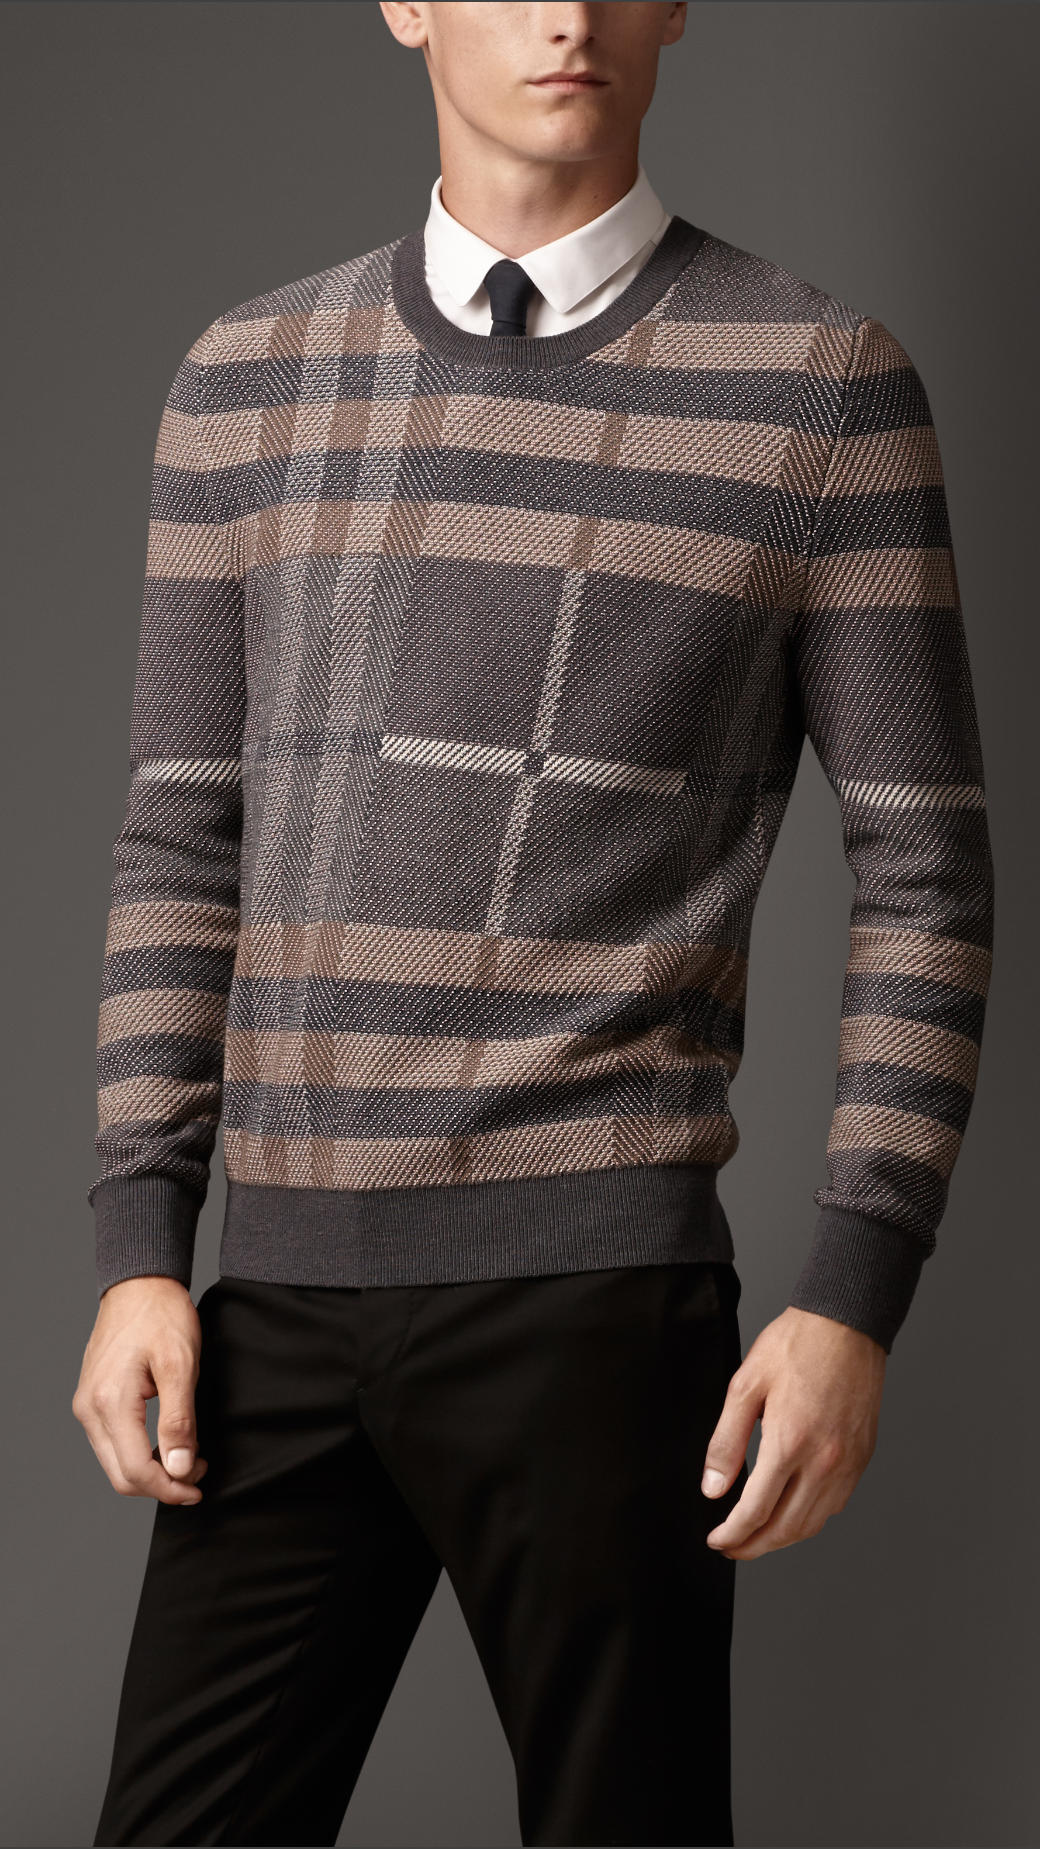 Lyst - Burberry Check Wool Silk Sweater in Gray for Men